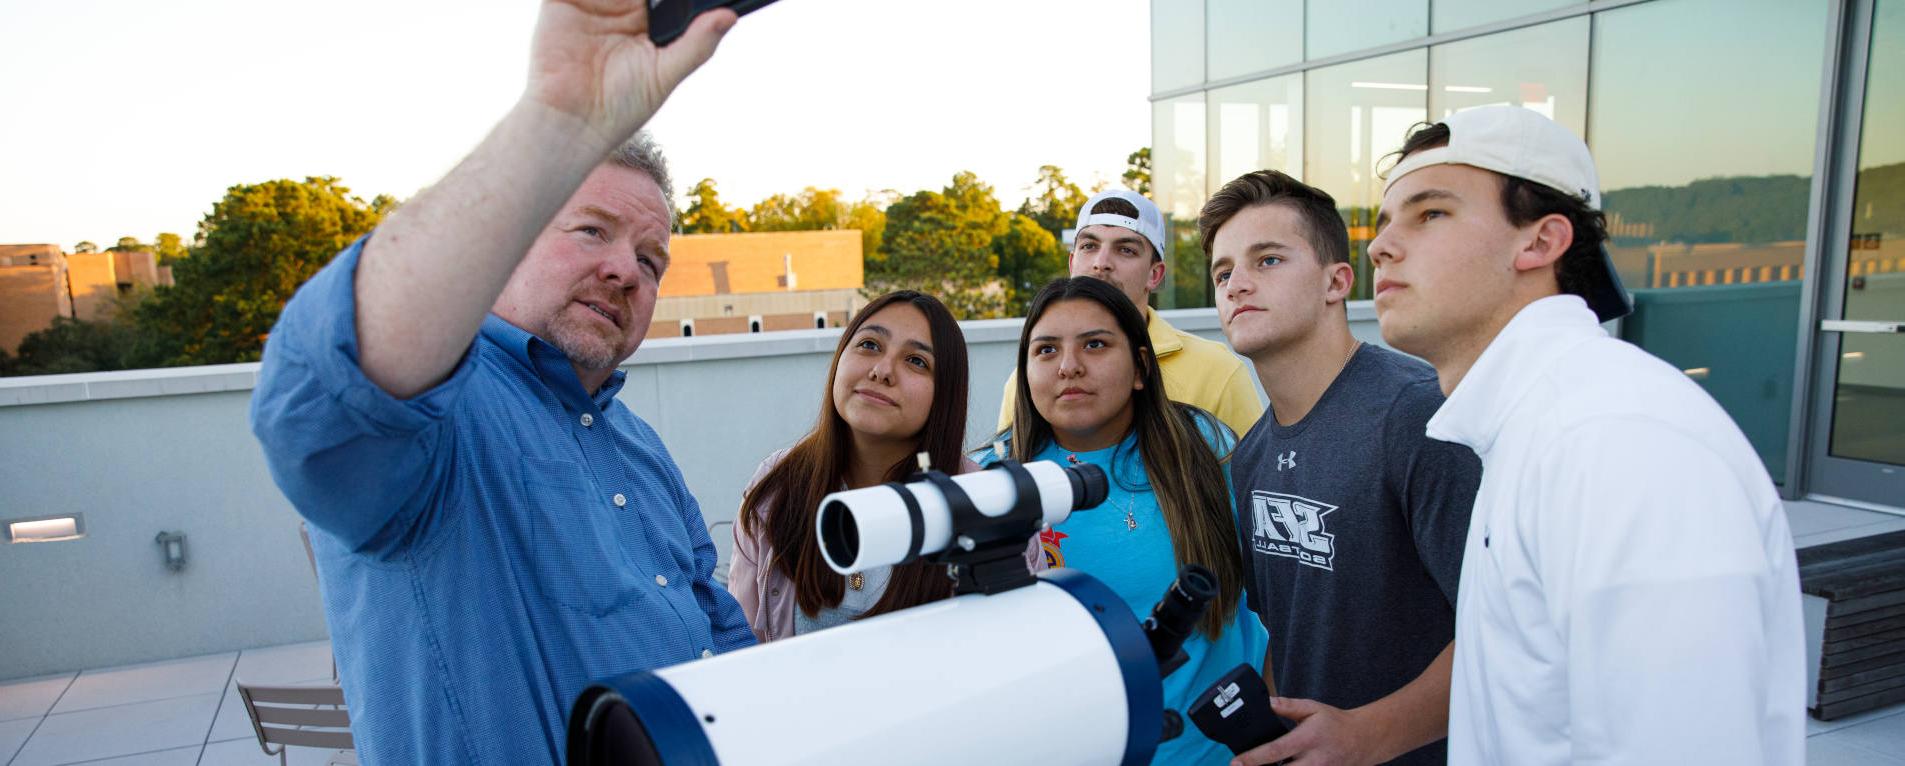 Dr. Dan Bruton demonstrates to a group of students how to use astronomy equipment